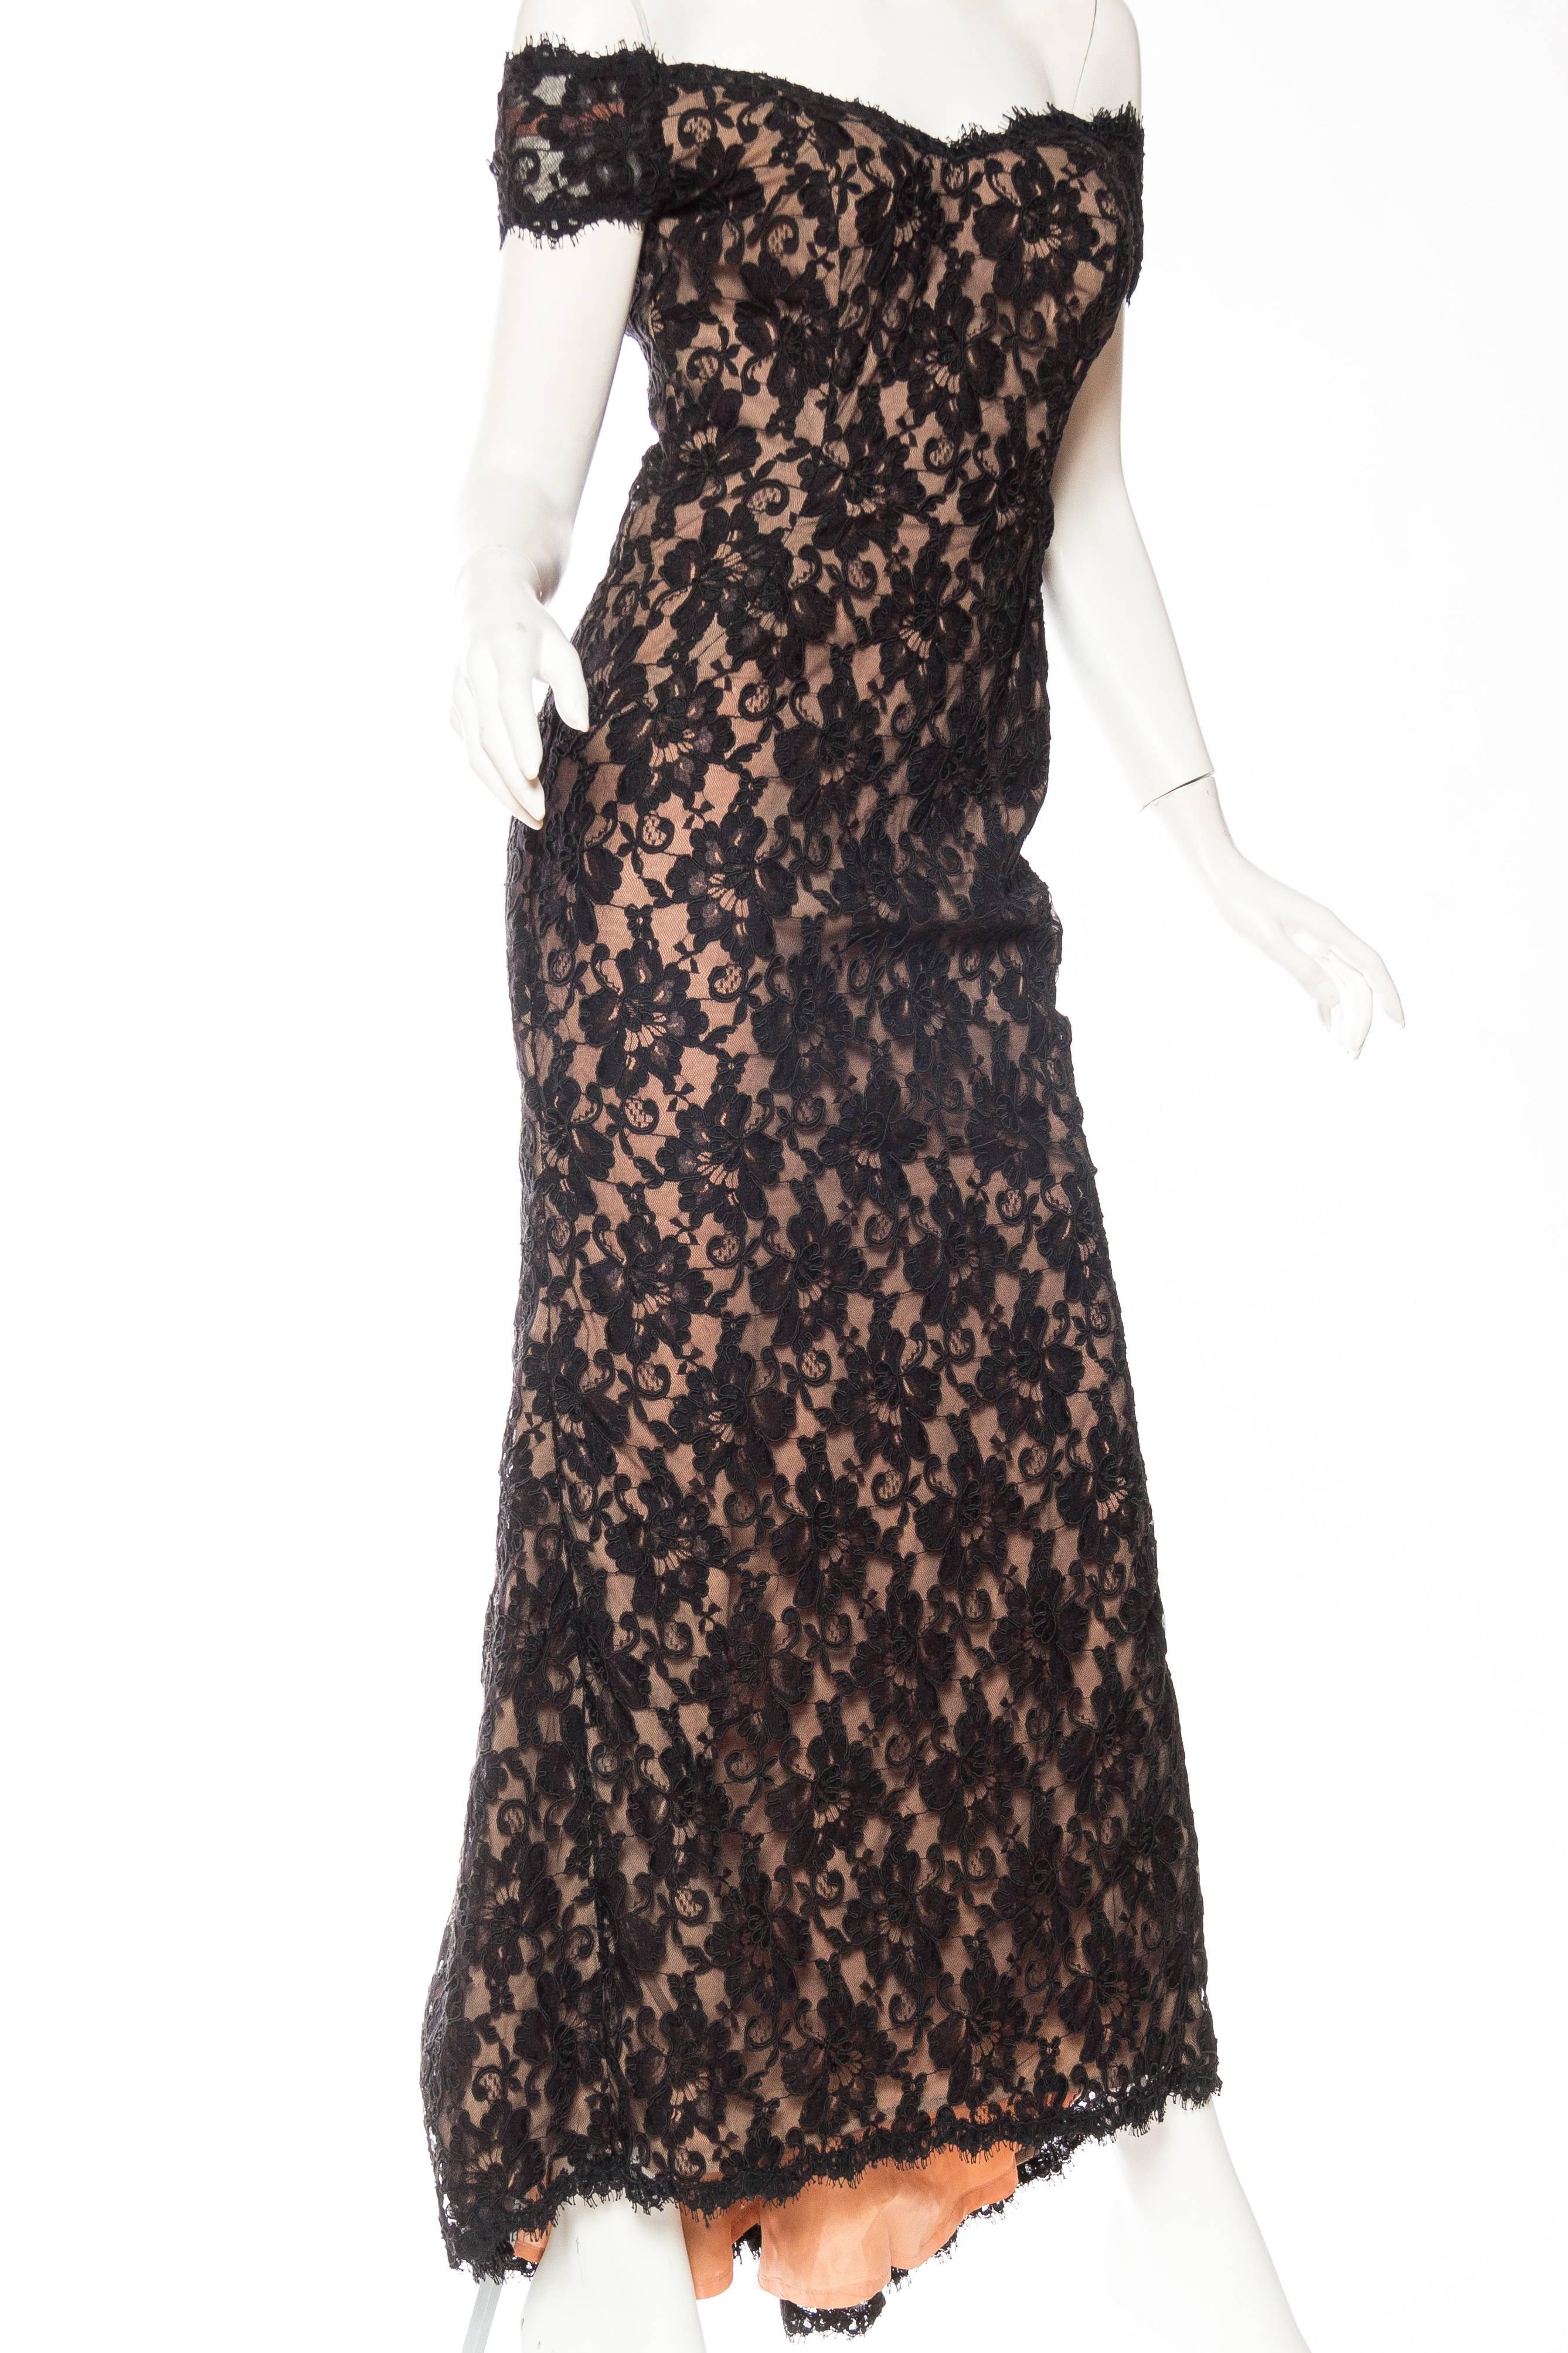 Women's 1980S VICTOR COSTA FOR I. MAGNIN Black Poly/Rayon Lace Off The Shoulder Gown Wi